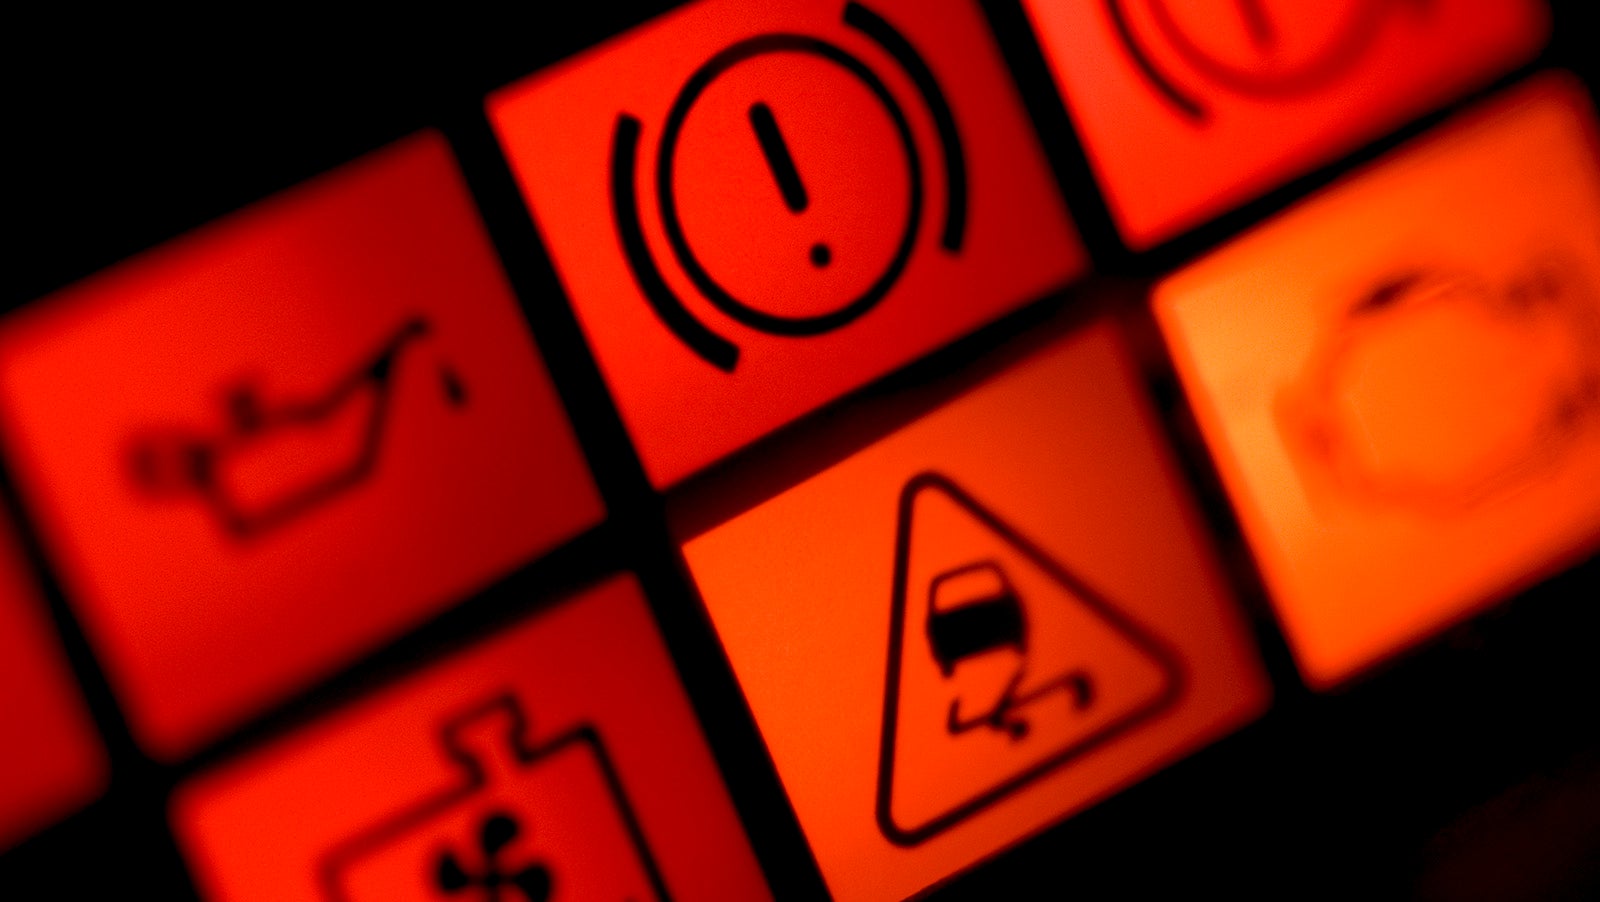 Guide to BMW Warning Lights: What Do They Mean?